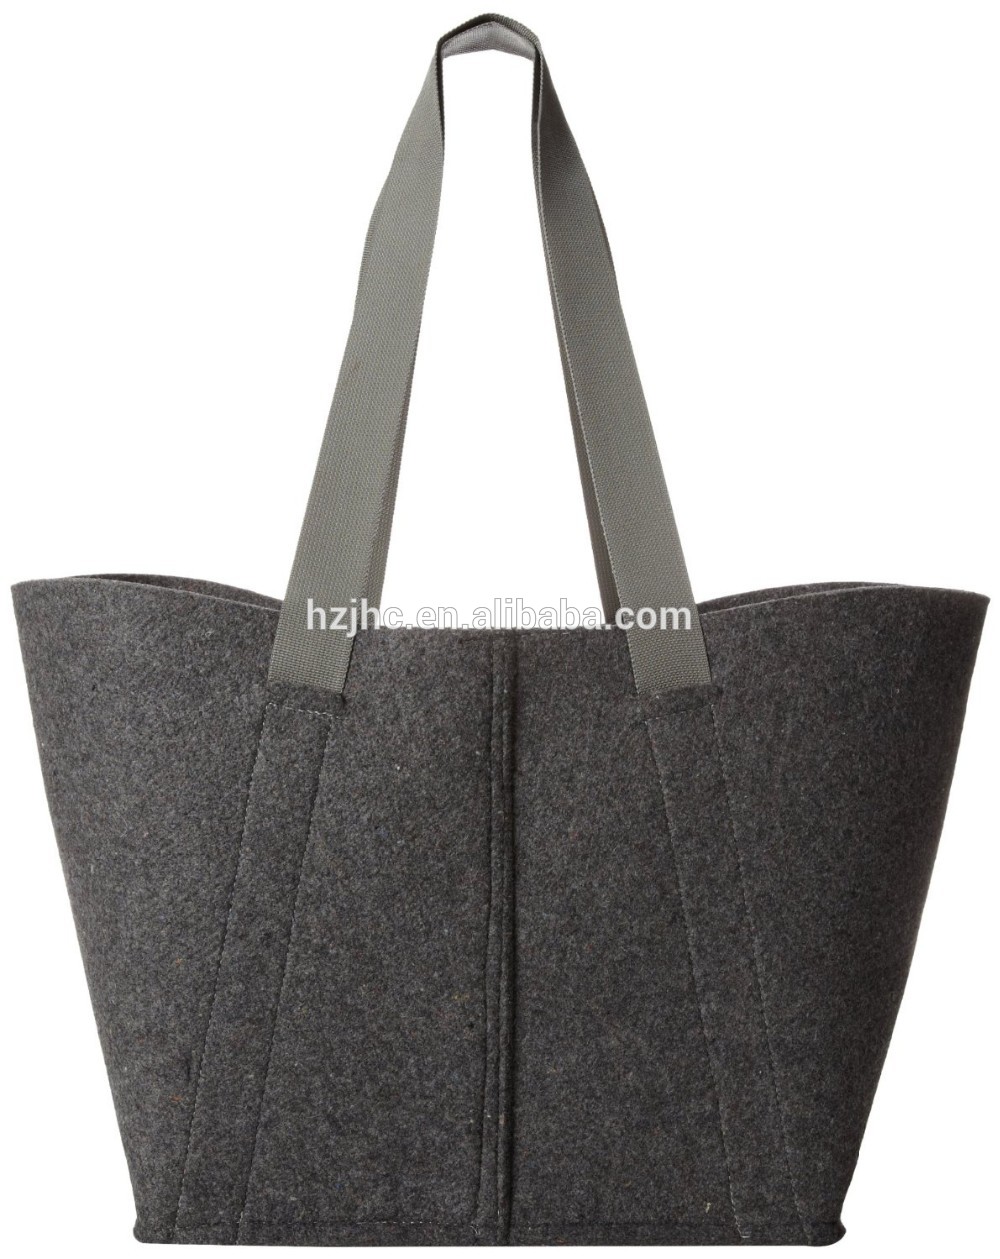 Customized polyester felt die cut tote bag